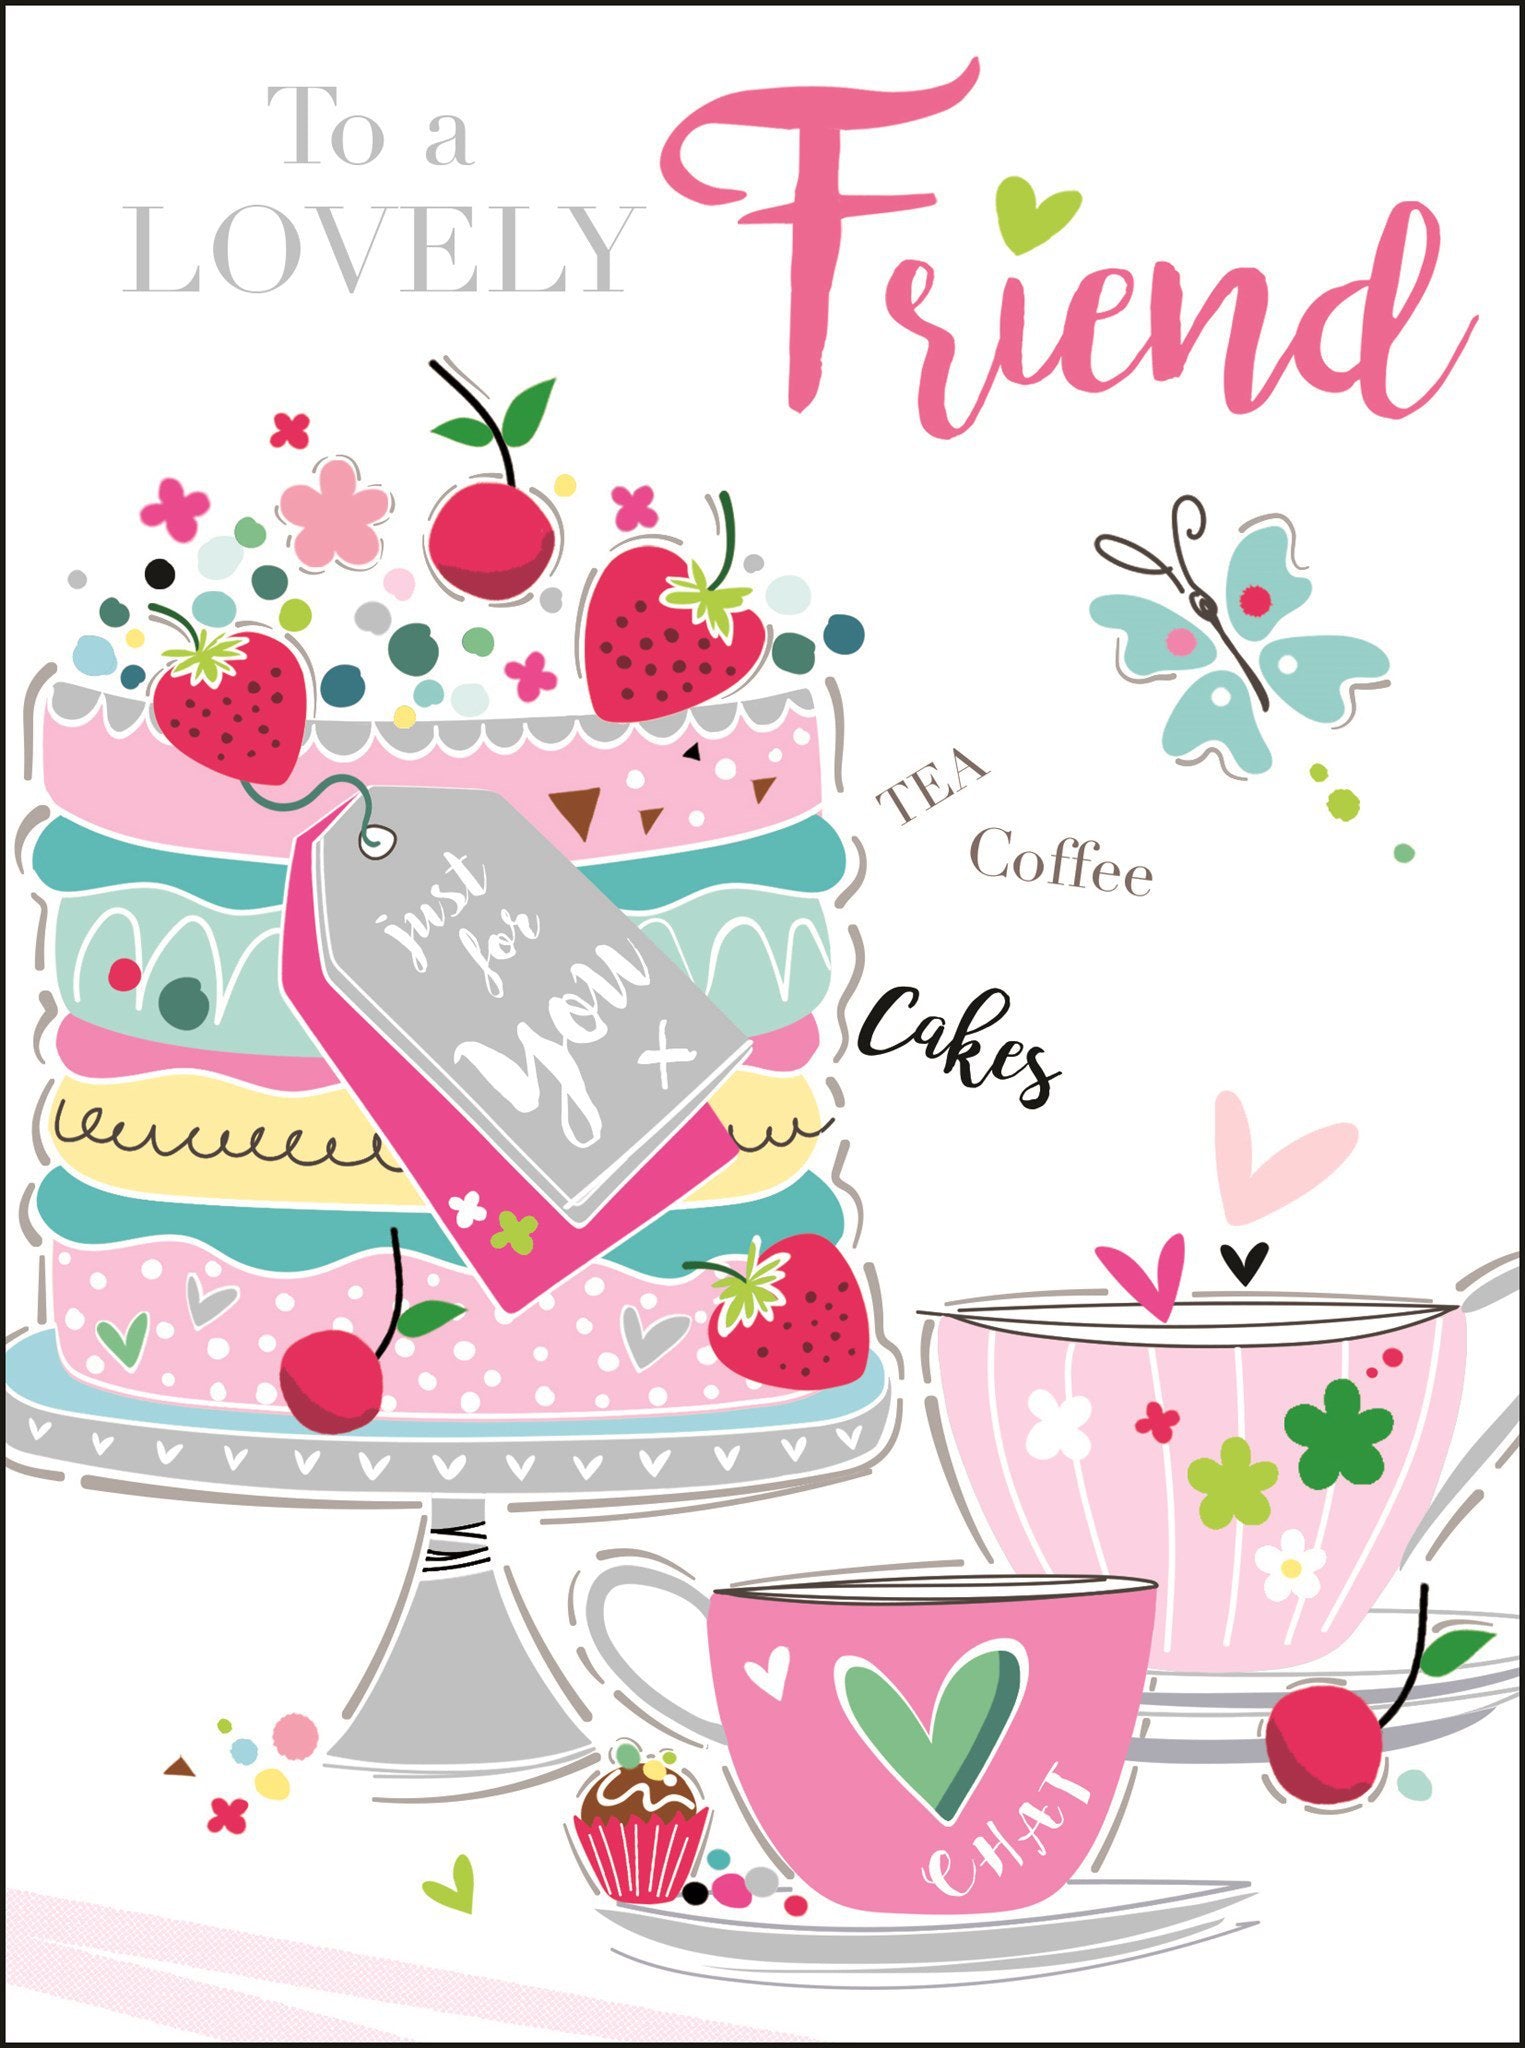 Front of Lovely Friend Birthday Cake Drinks Greetings Card